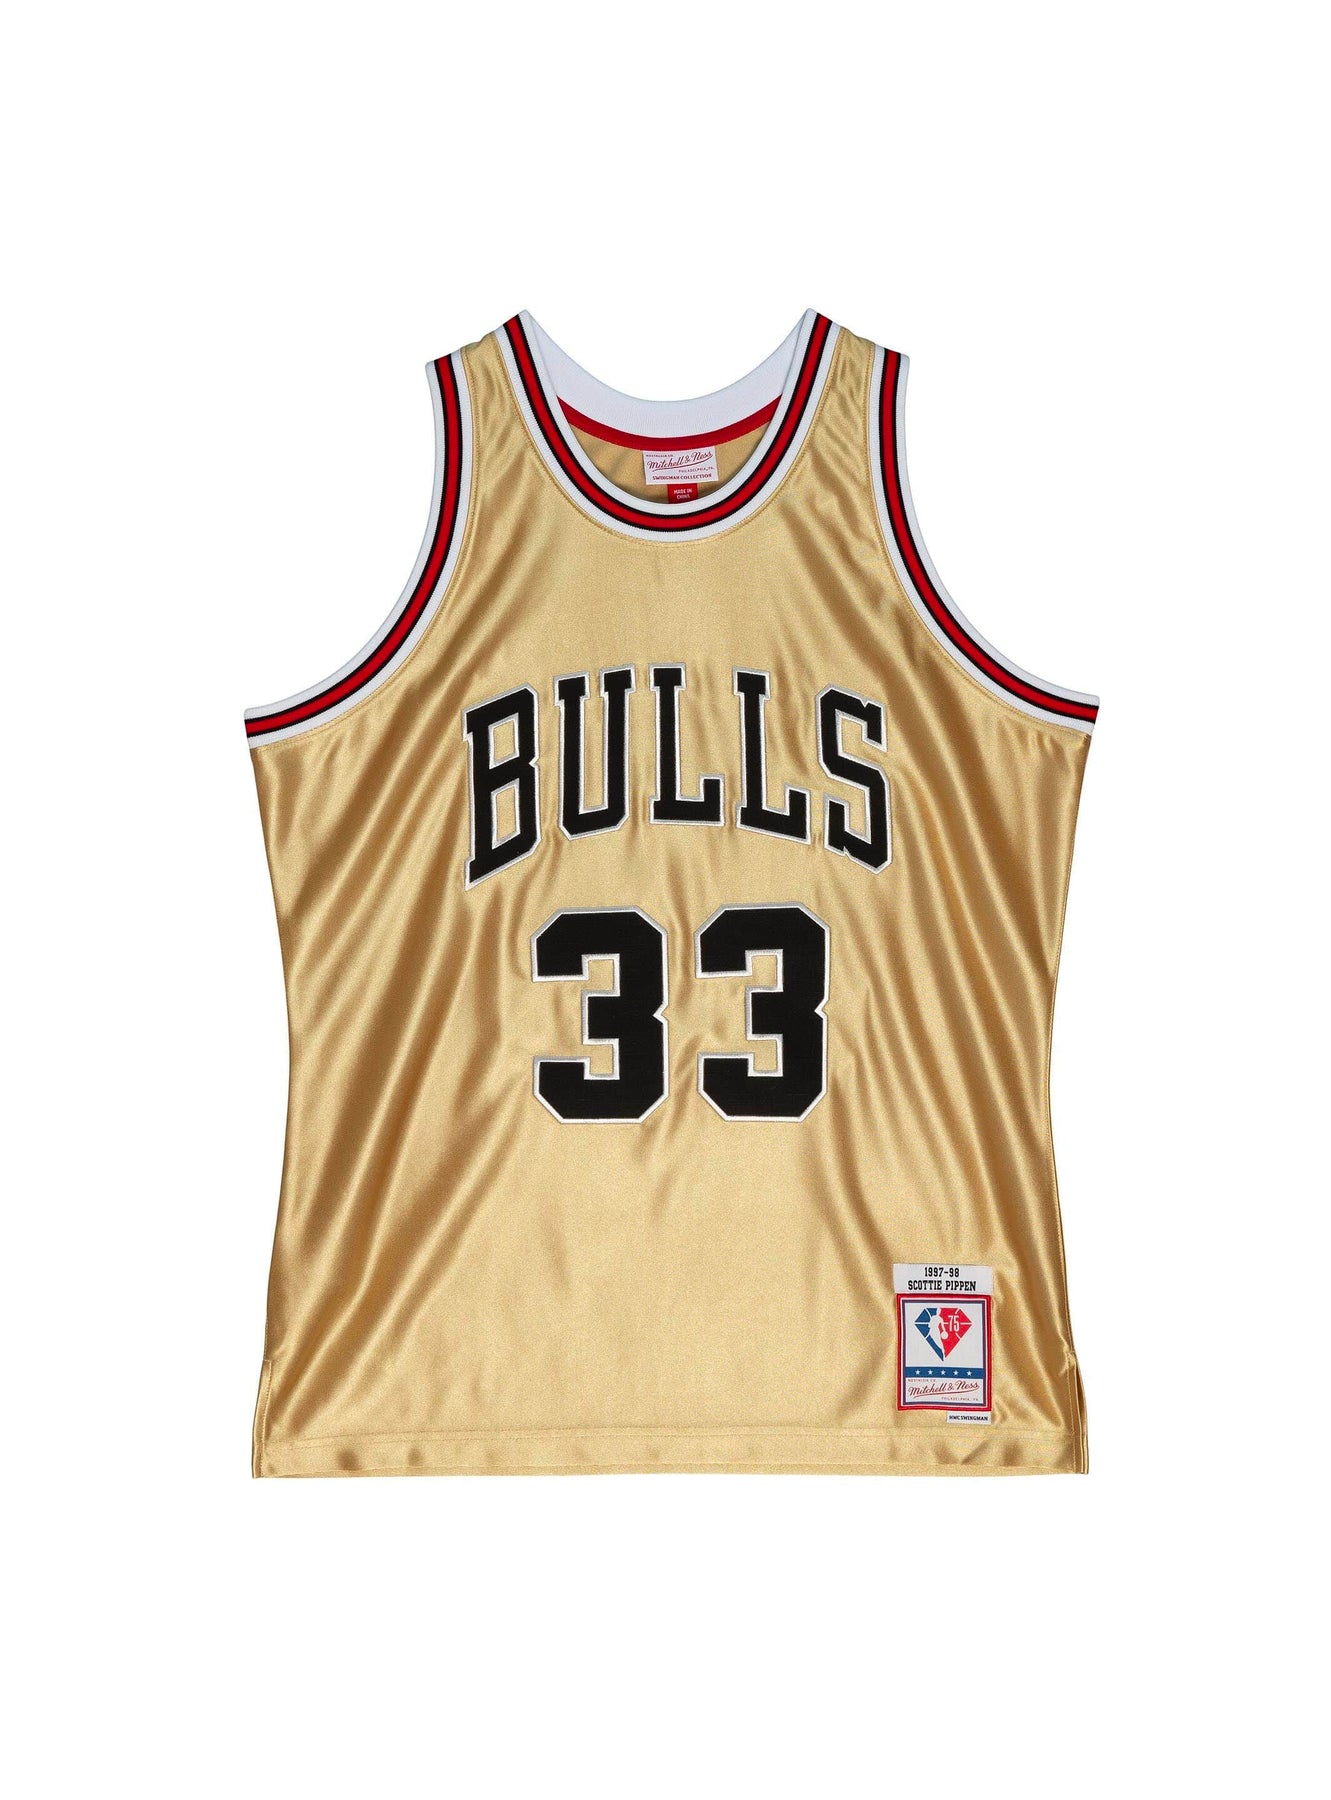 pippen gold jersey